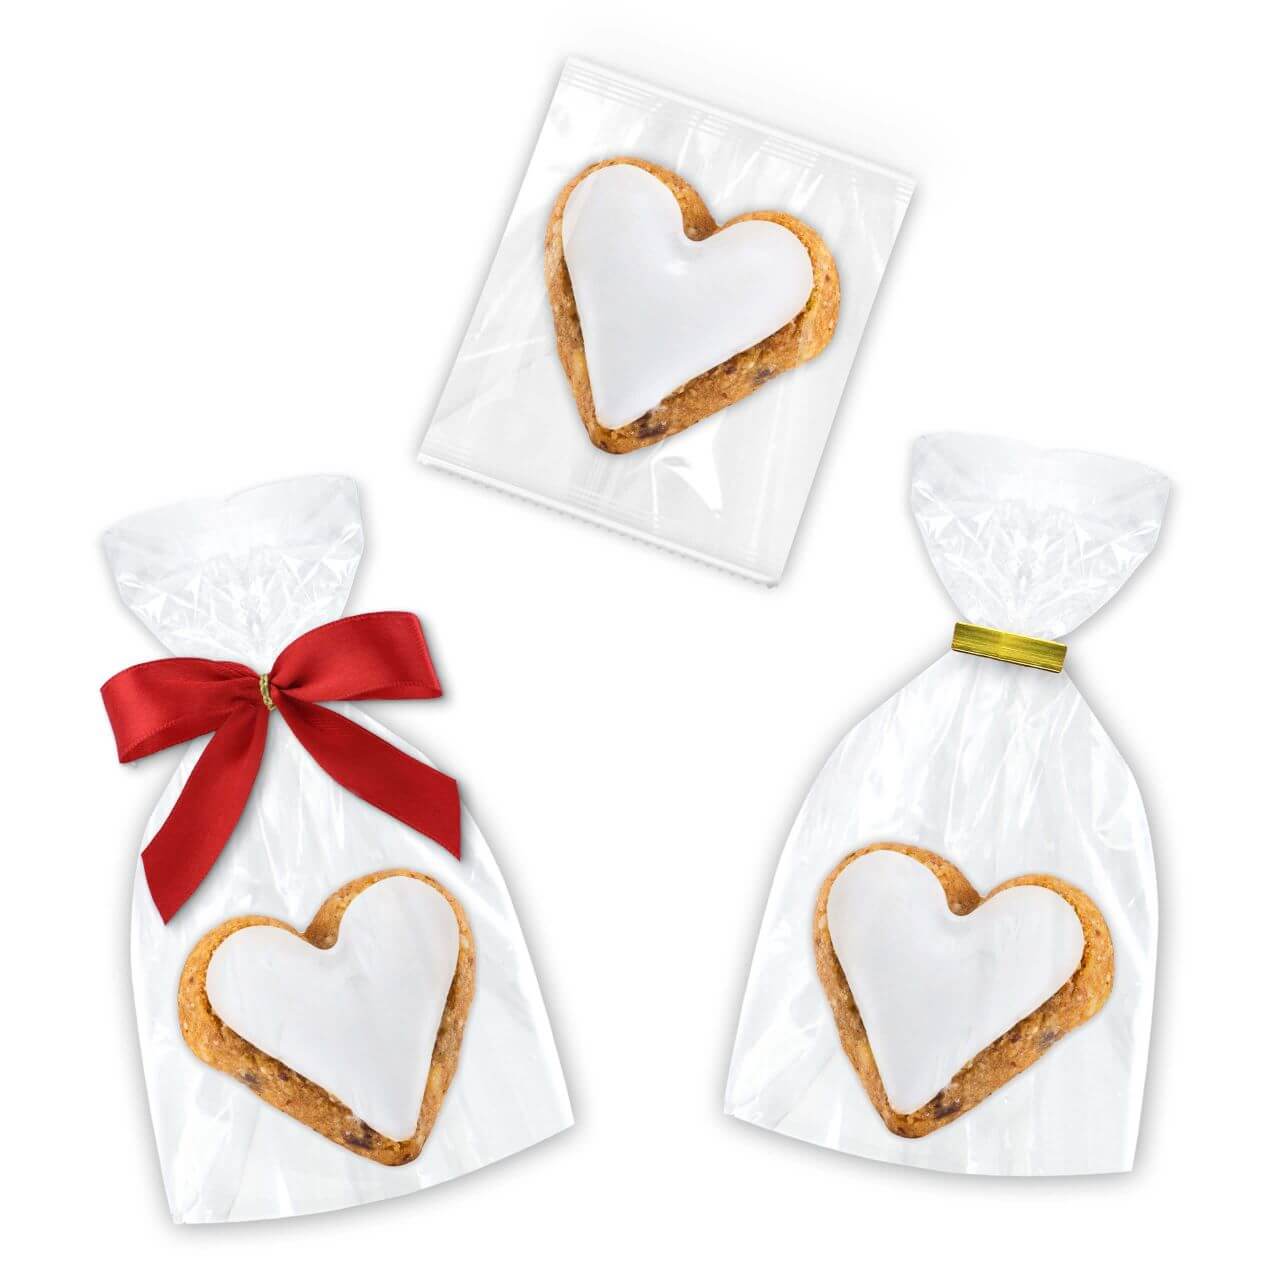 Cinnamon apple hearts in different packaging